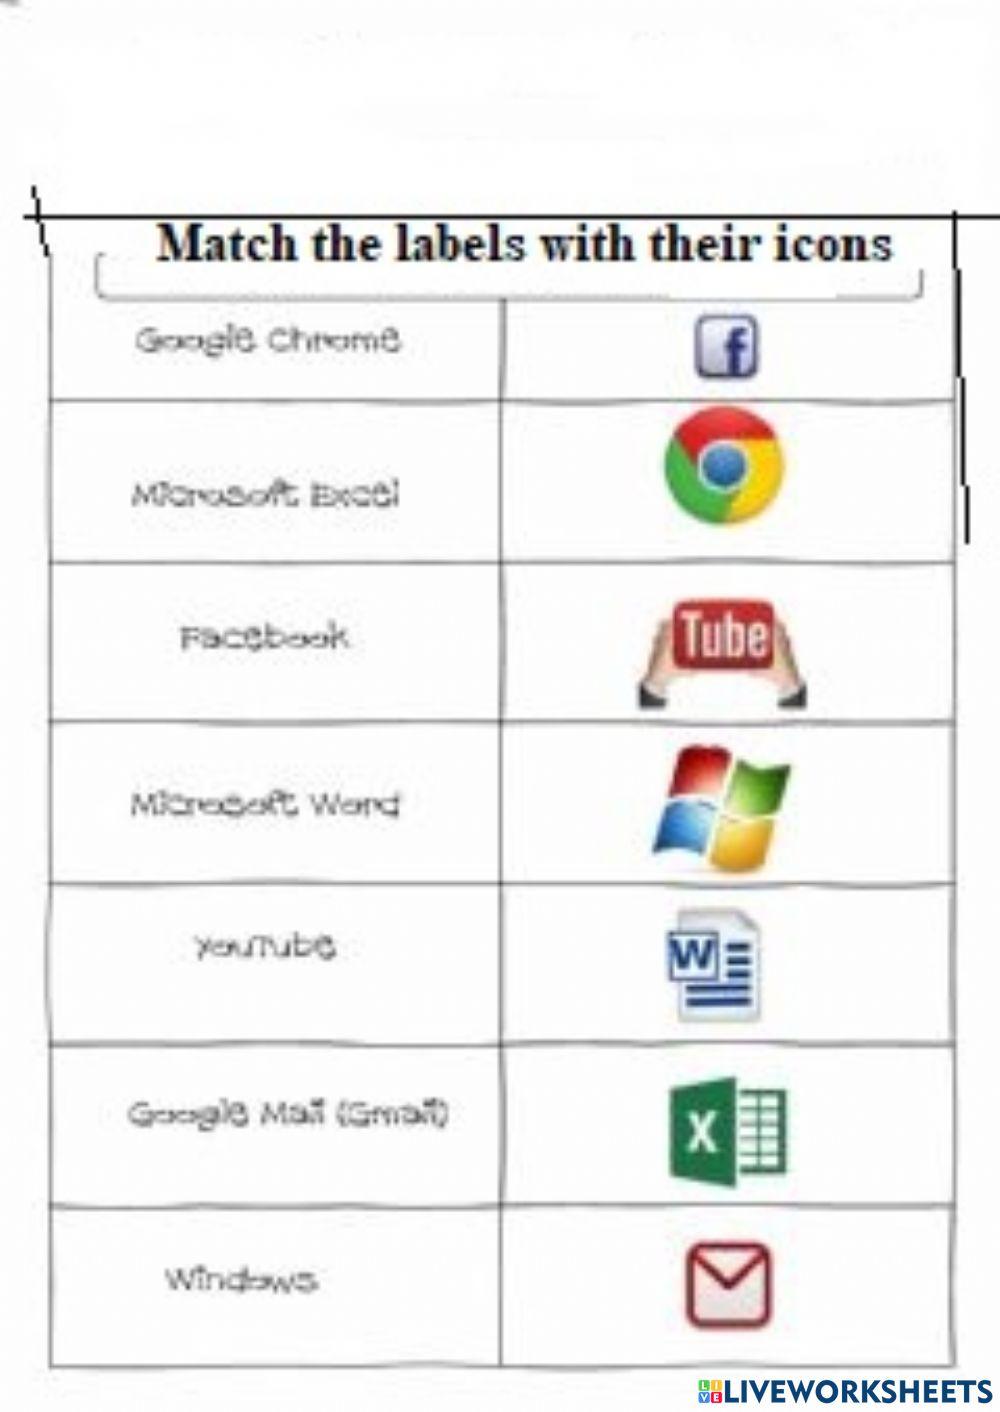 Matching labels with their LOGO